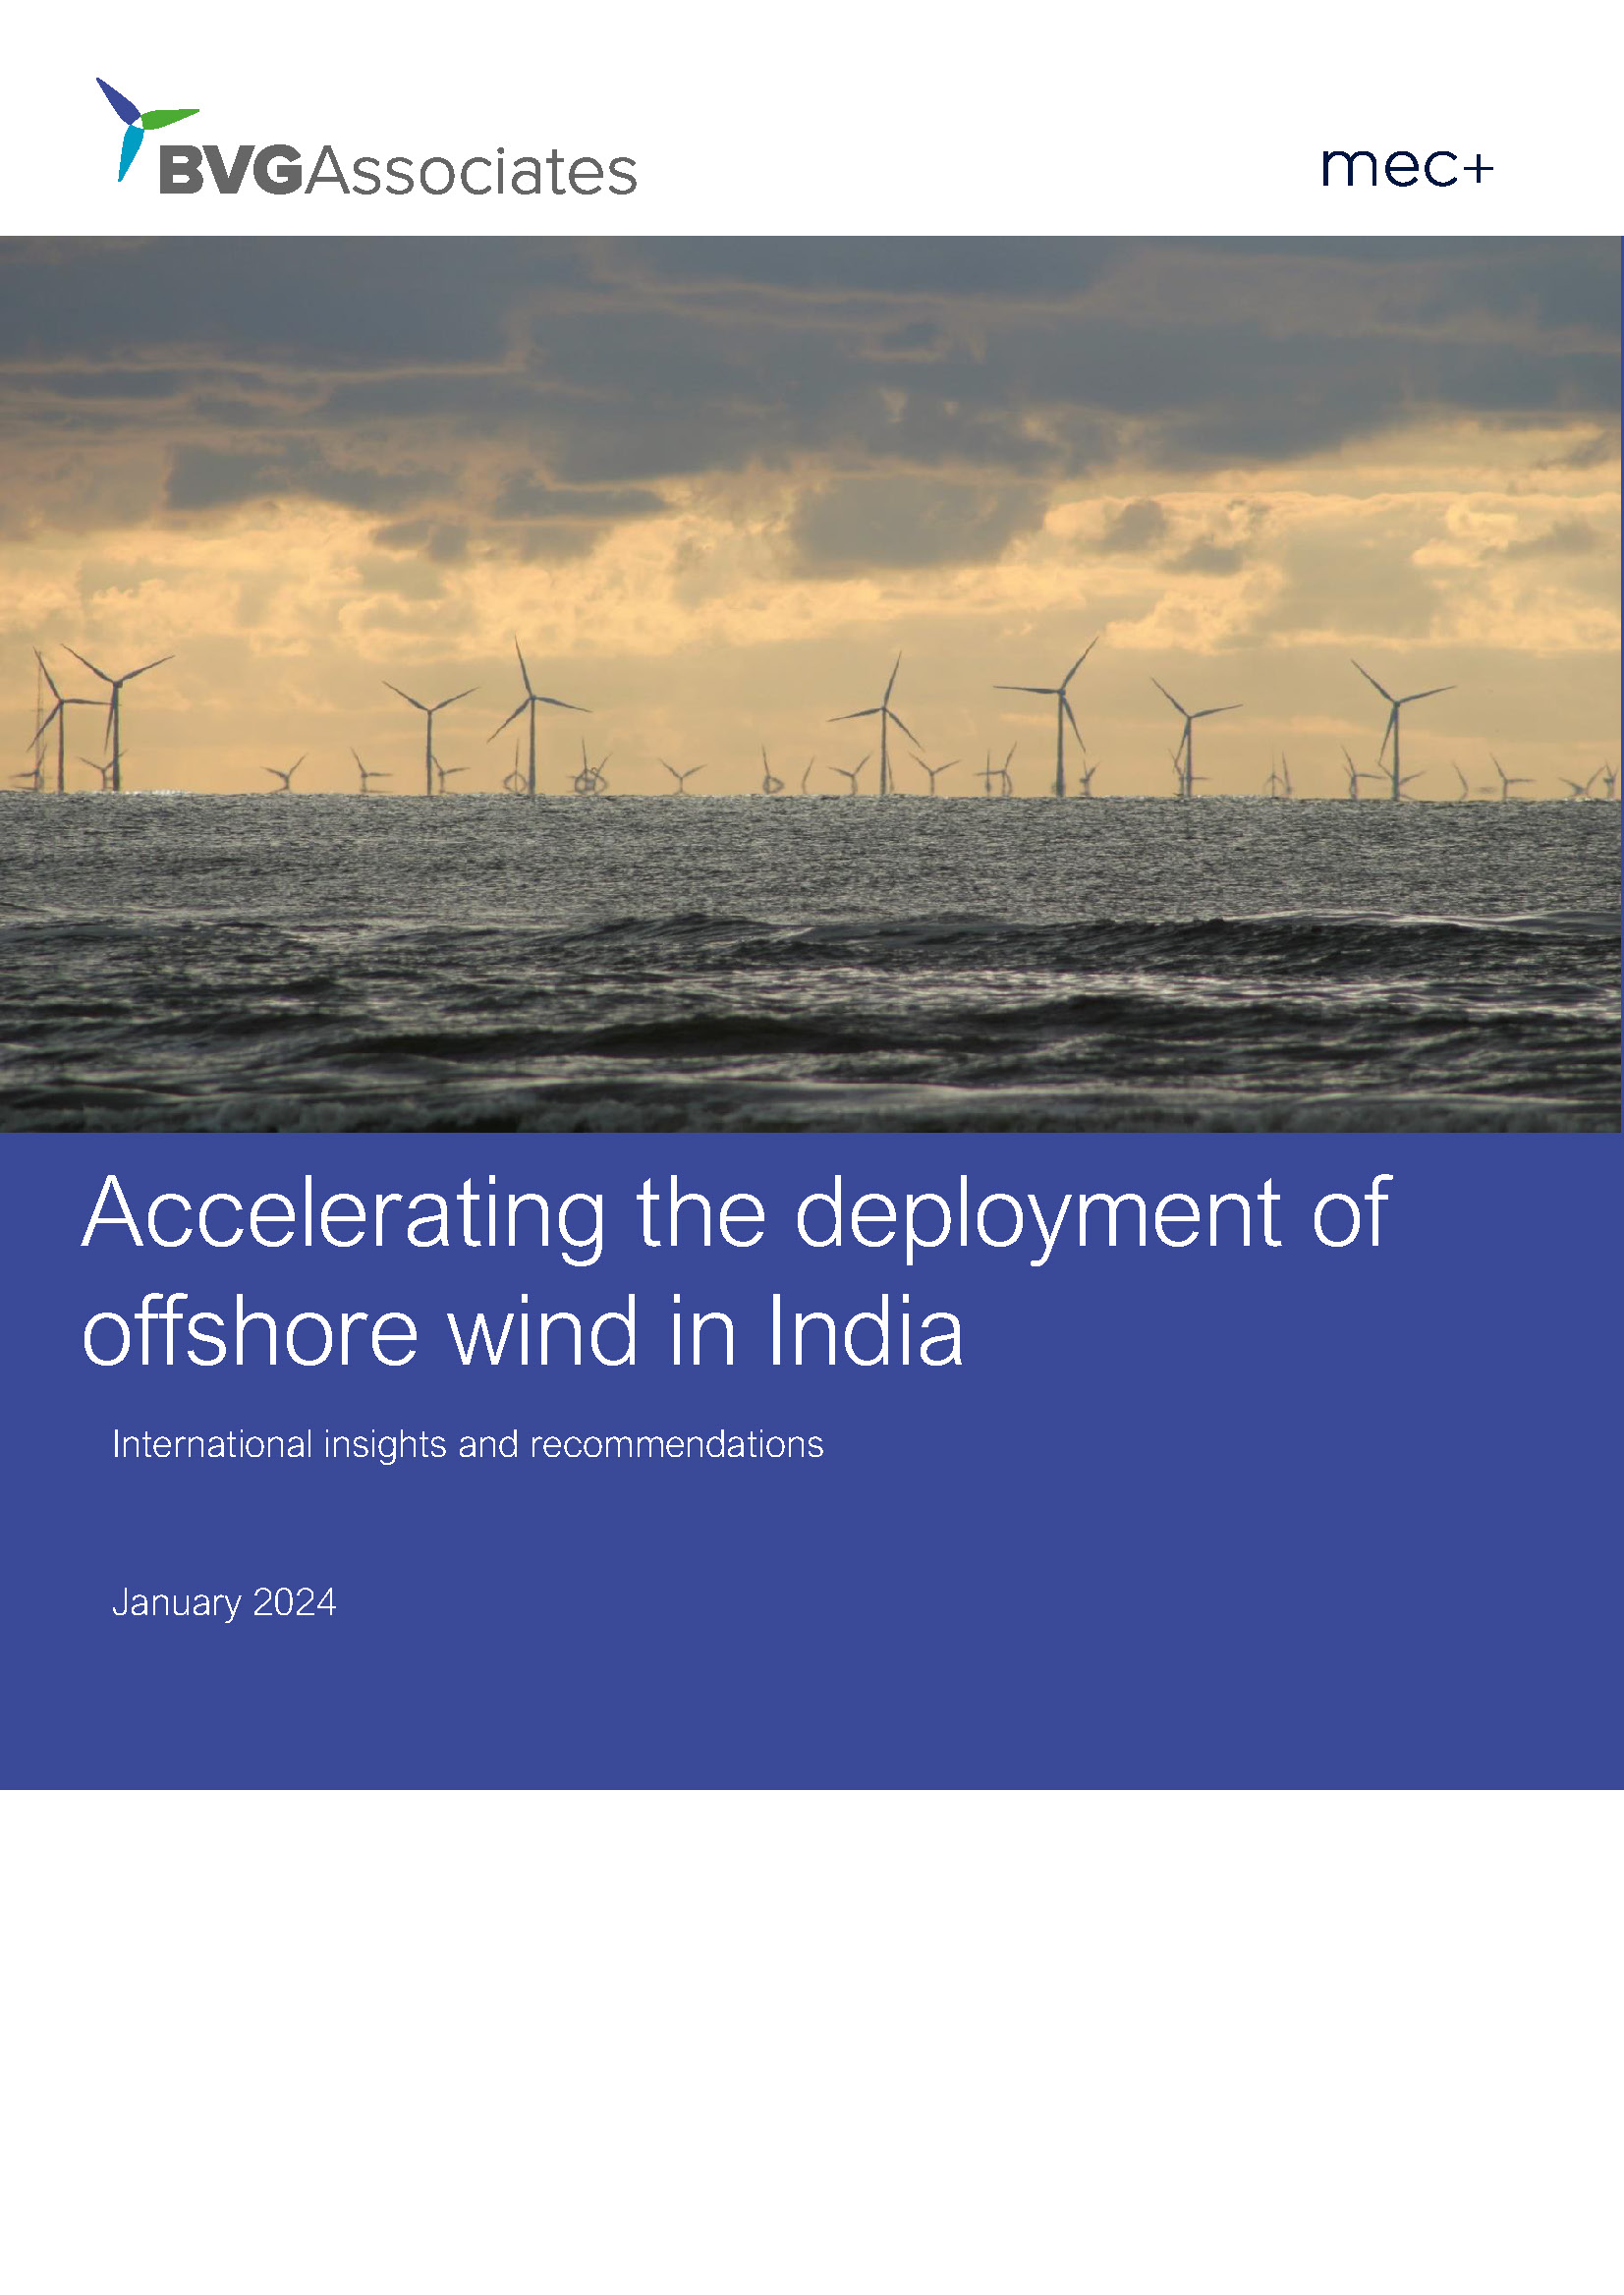 India’s offshore wind potential